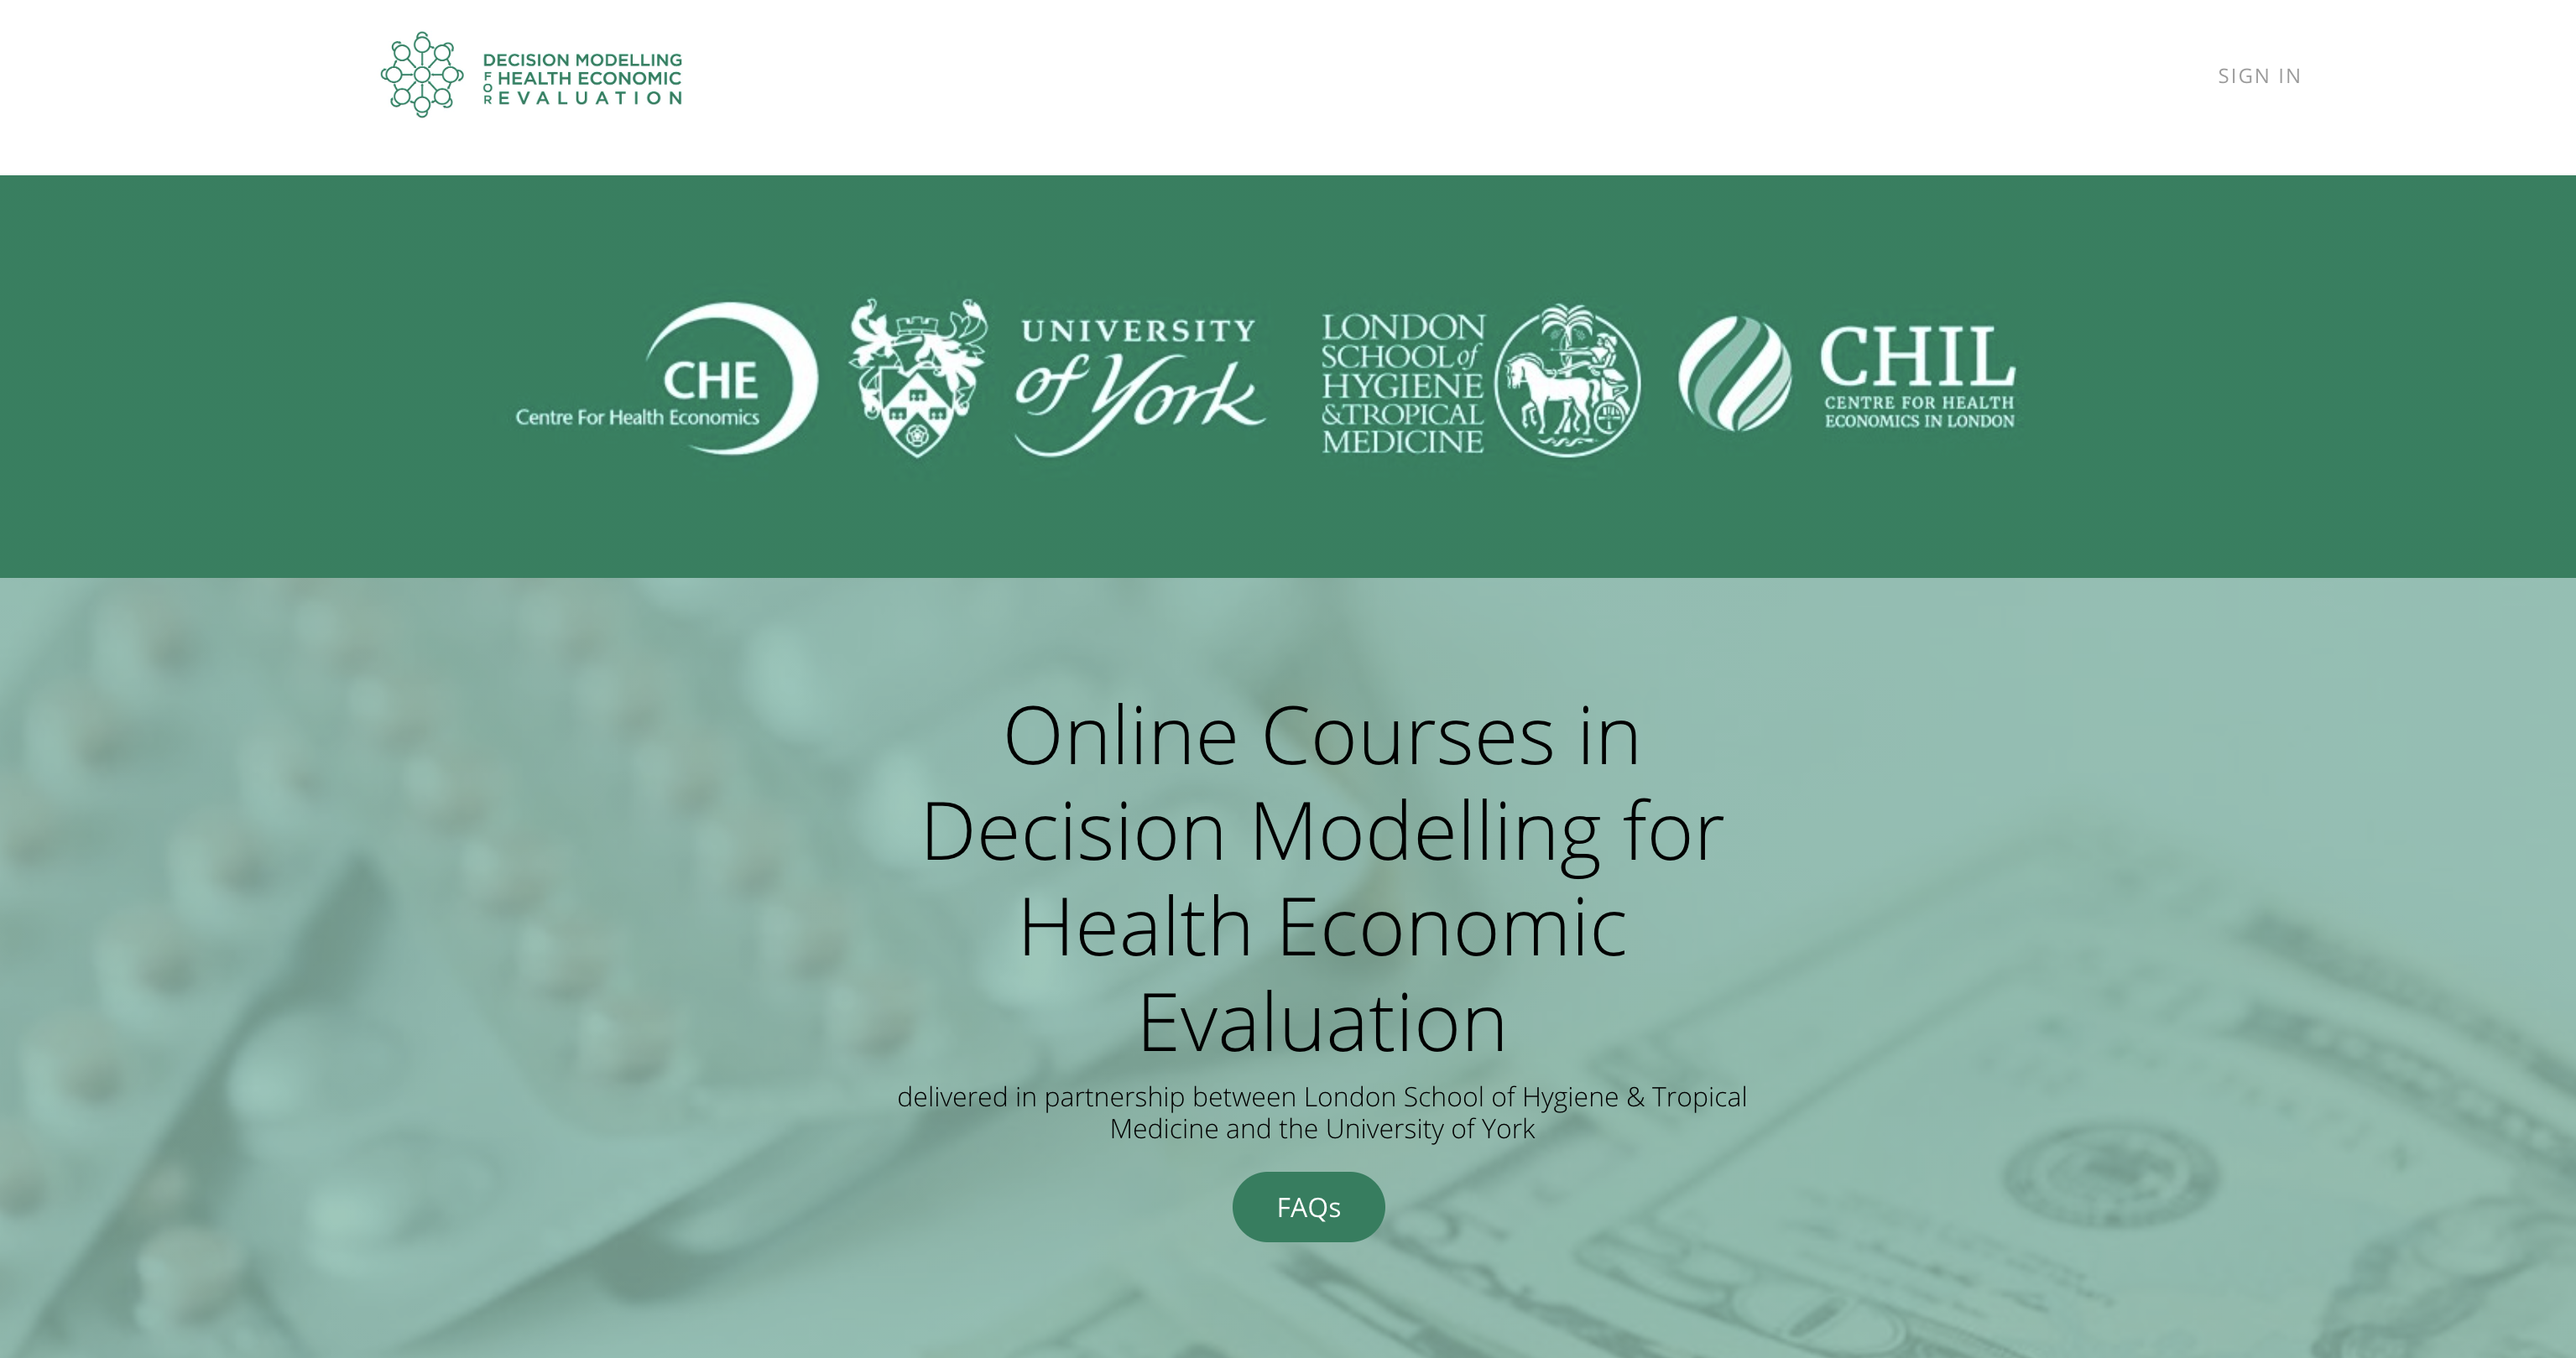 screenshot of the Online Courses in Decision Modelling for Health Economic Evaluation website